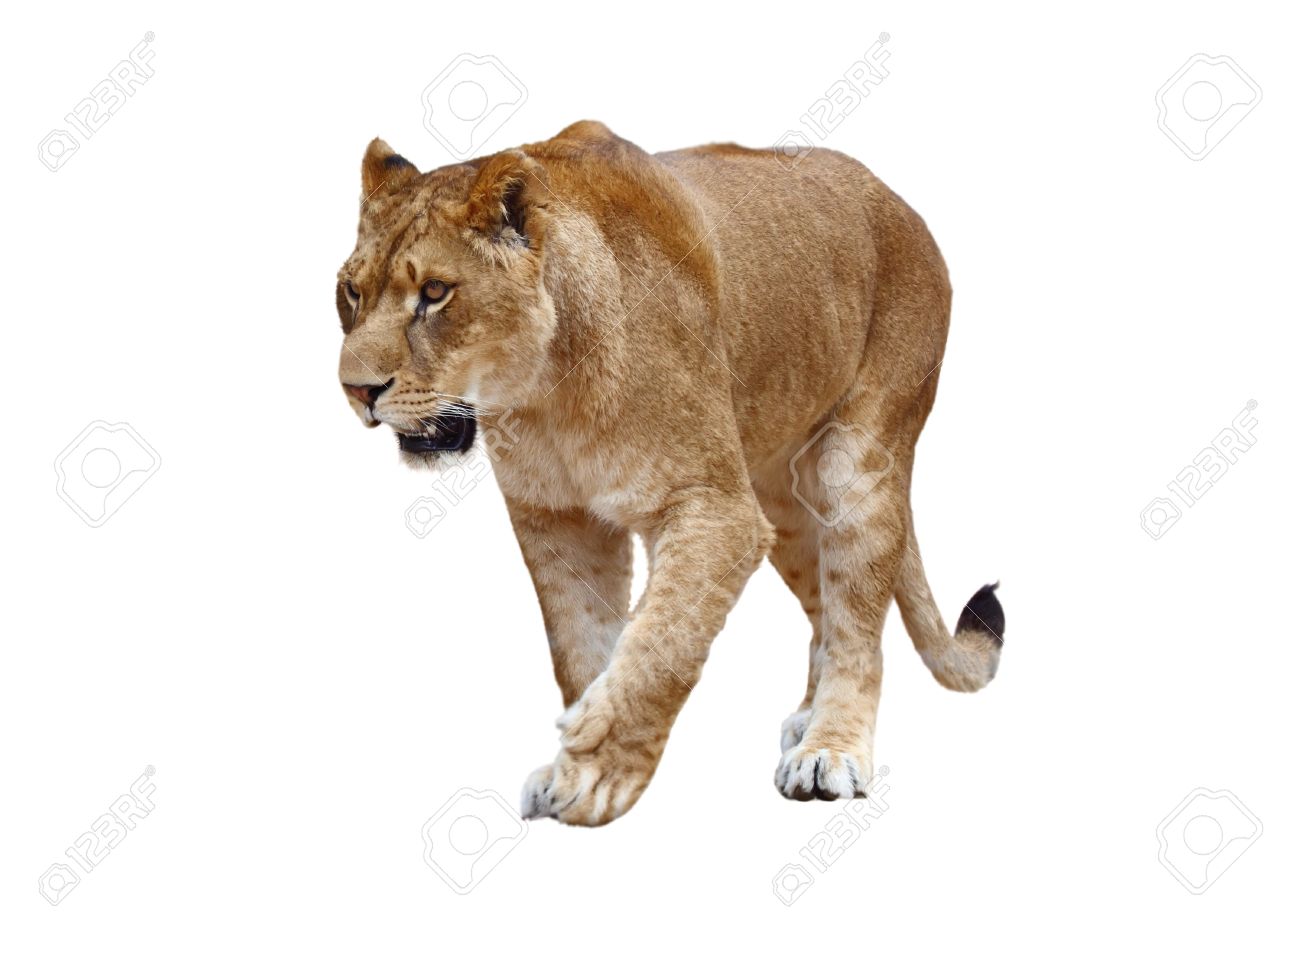 Lioness On White Background Stock Photo Picture And Royalty